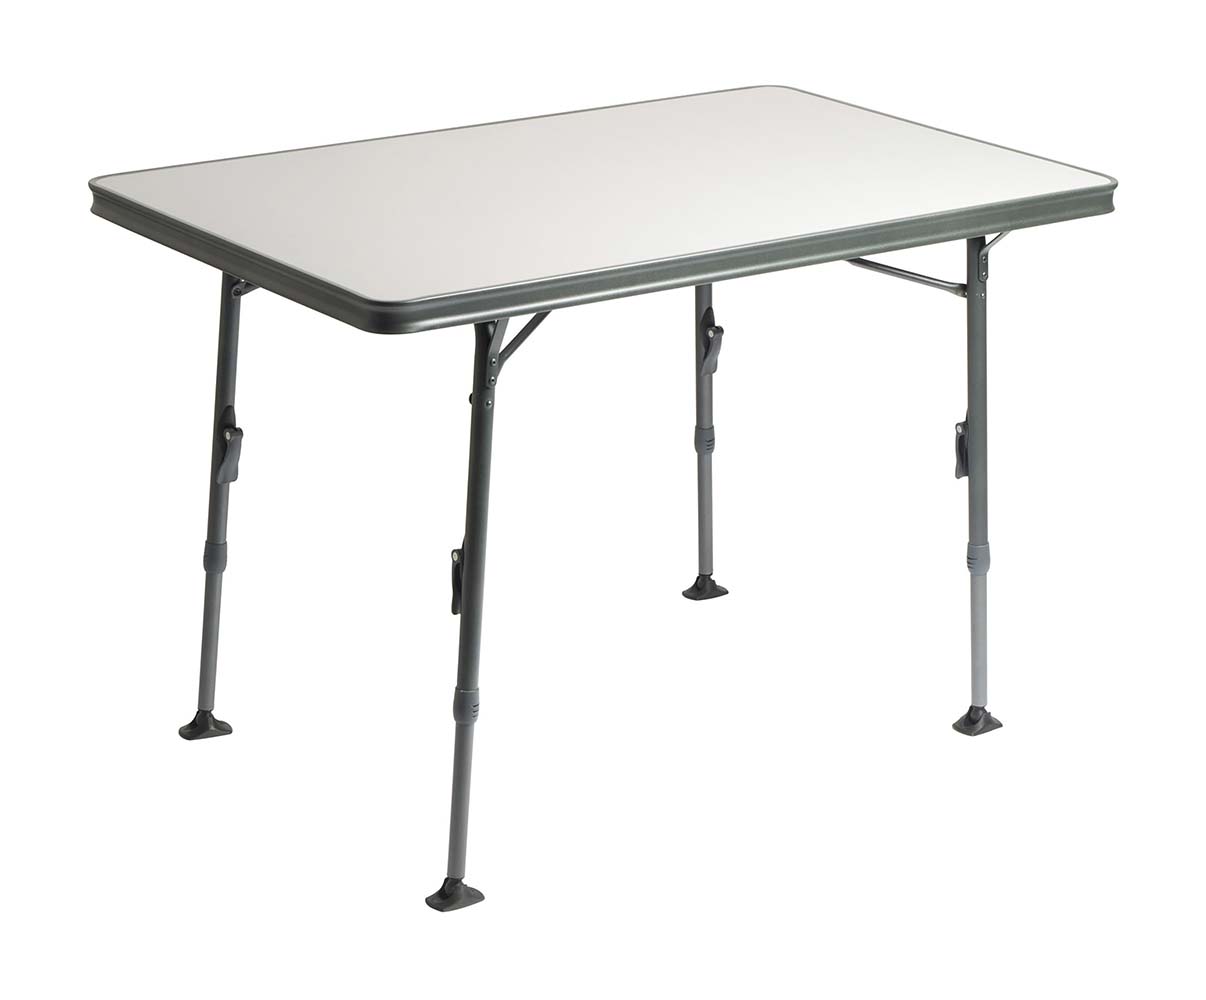 1151380 "A luxury and stylish table. This lightweight camping table is fitted with a heat resistant and waterproof table top and has an extra strengthened aluminium construction. In addition, the finishing of the legs and the table edges make for a stylish appearance. The table has continuously adjustable legs which can be folded up, which means that the table can be taken with you easily and compactly. This table's stabilising feet mean that it can stand safely on any surface."